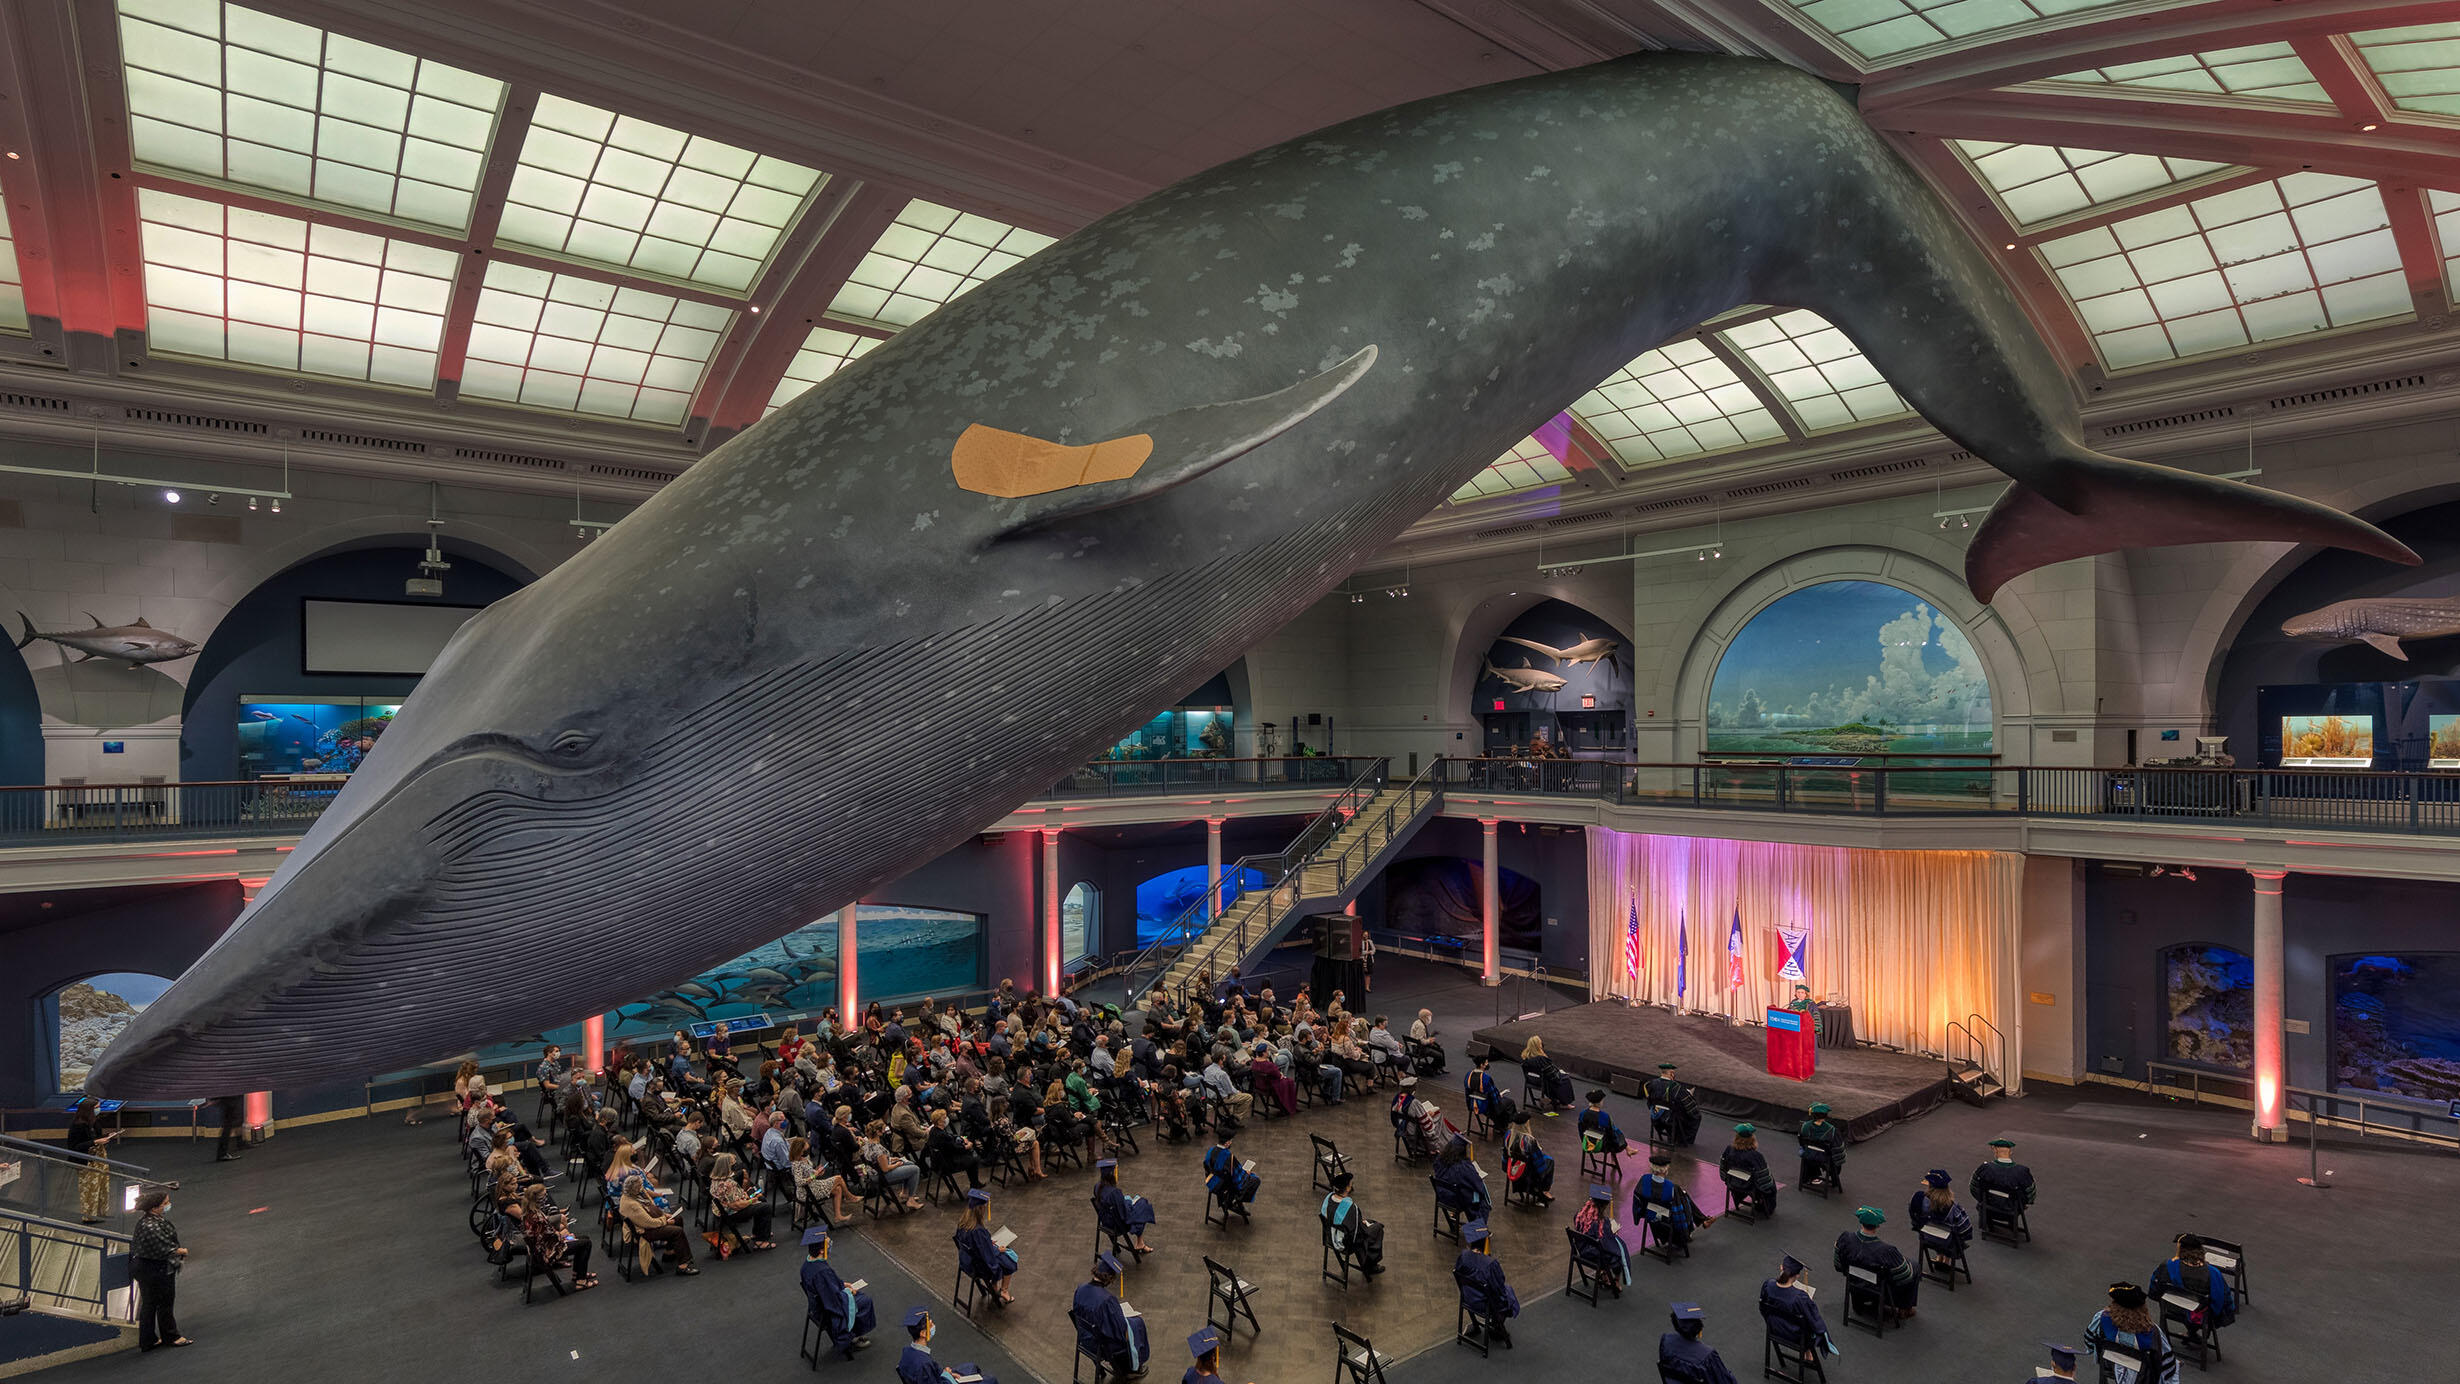 Graduating students are seated in chairs below the Blue Whale model which hangs in the Milstein Hall of Ocean Life.